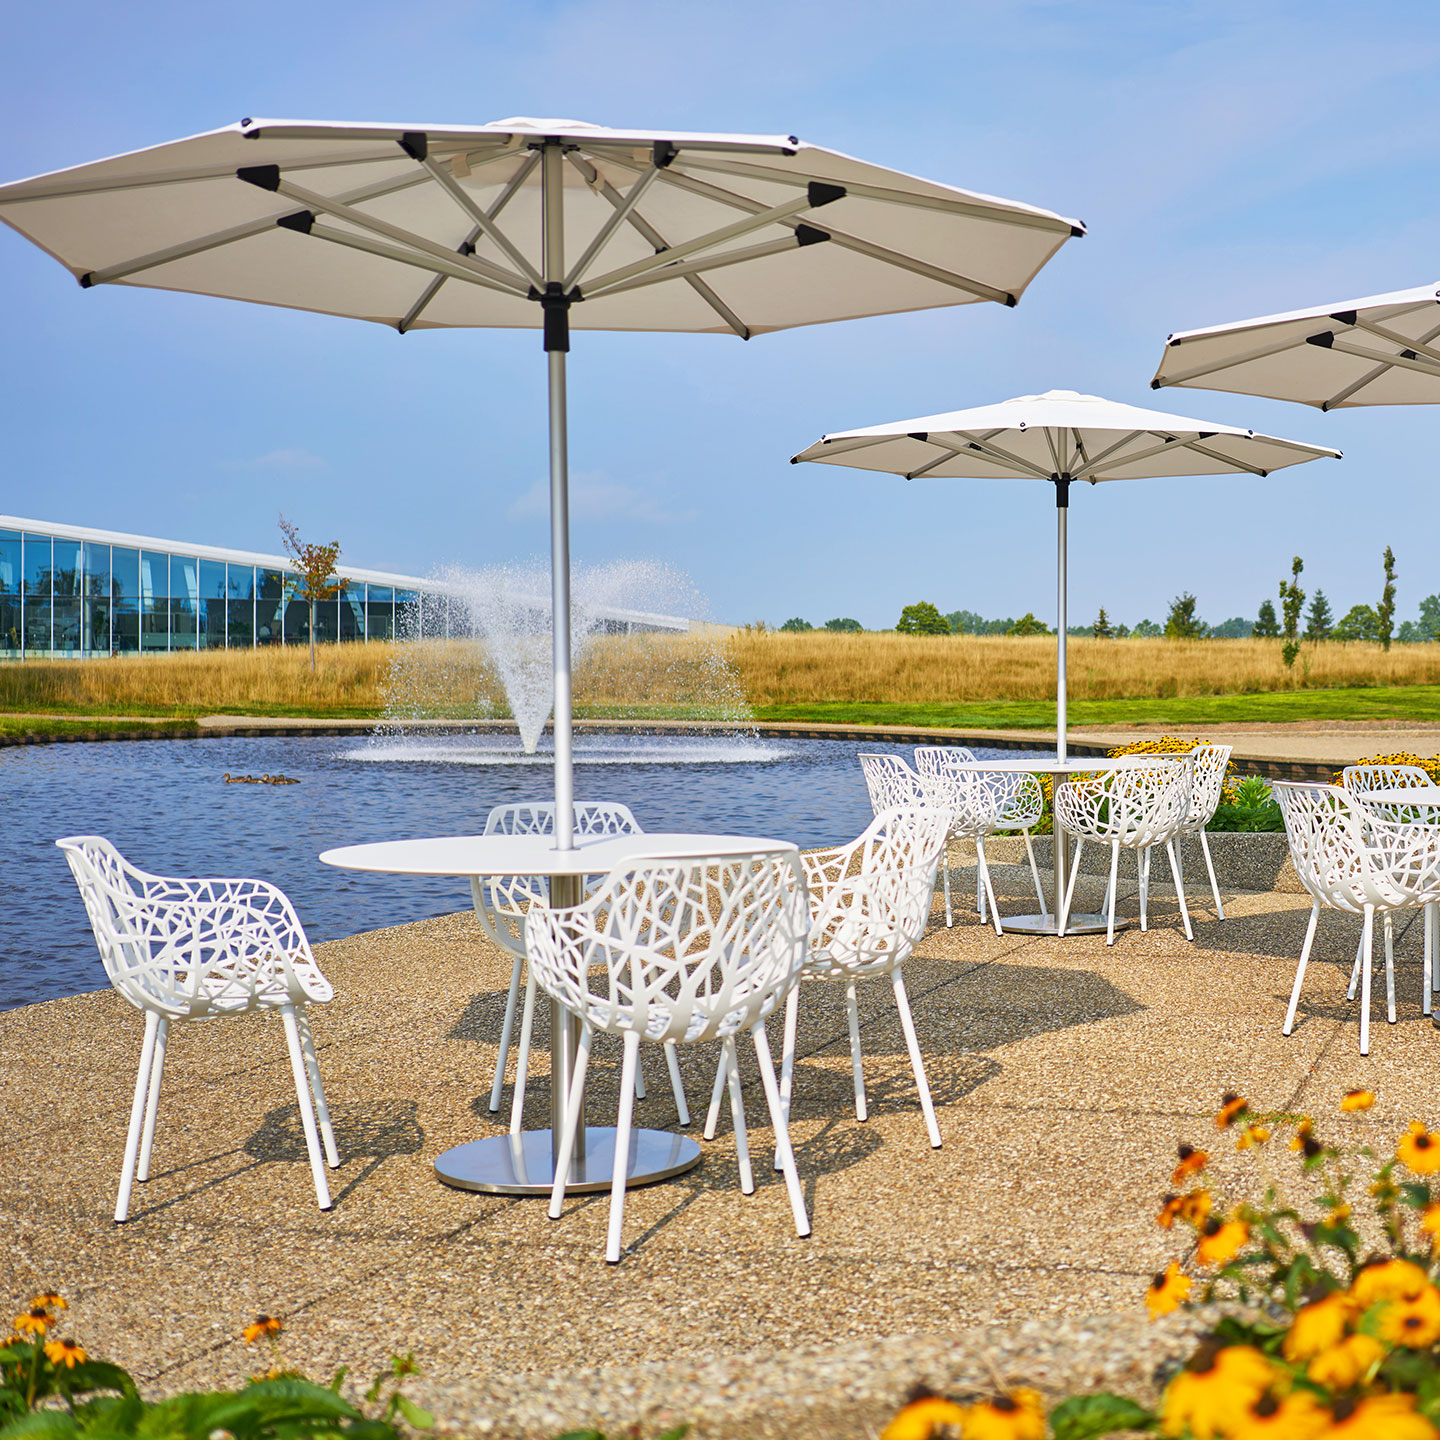 Haworth Janus Titan Umbrella Accessories on outdoor seating area covering tables next to fountain